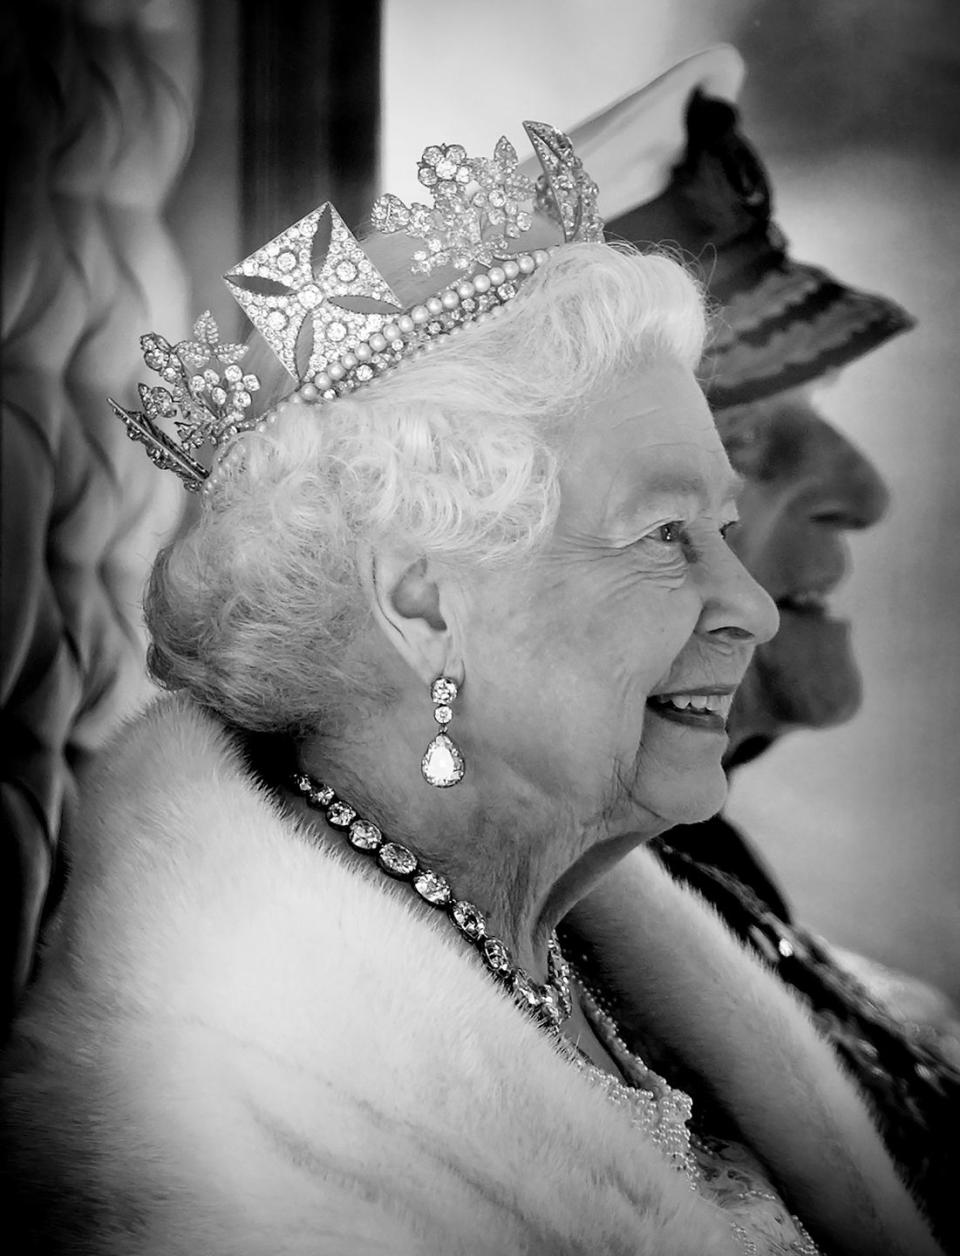 <p>Queen Elizabeth II was photographed in the Diamond Jubilee state coach after the opening of Parliament wearing the Diamond Diadem—originally made for King George IV by Rundell, Bridge, and Rundell in 1820—the Coronation earrings and the Coronation necklace, created by Garrard in 1858 for Queen Victoria.</p>